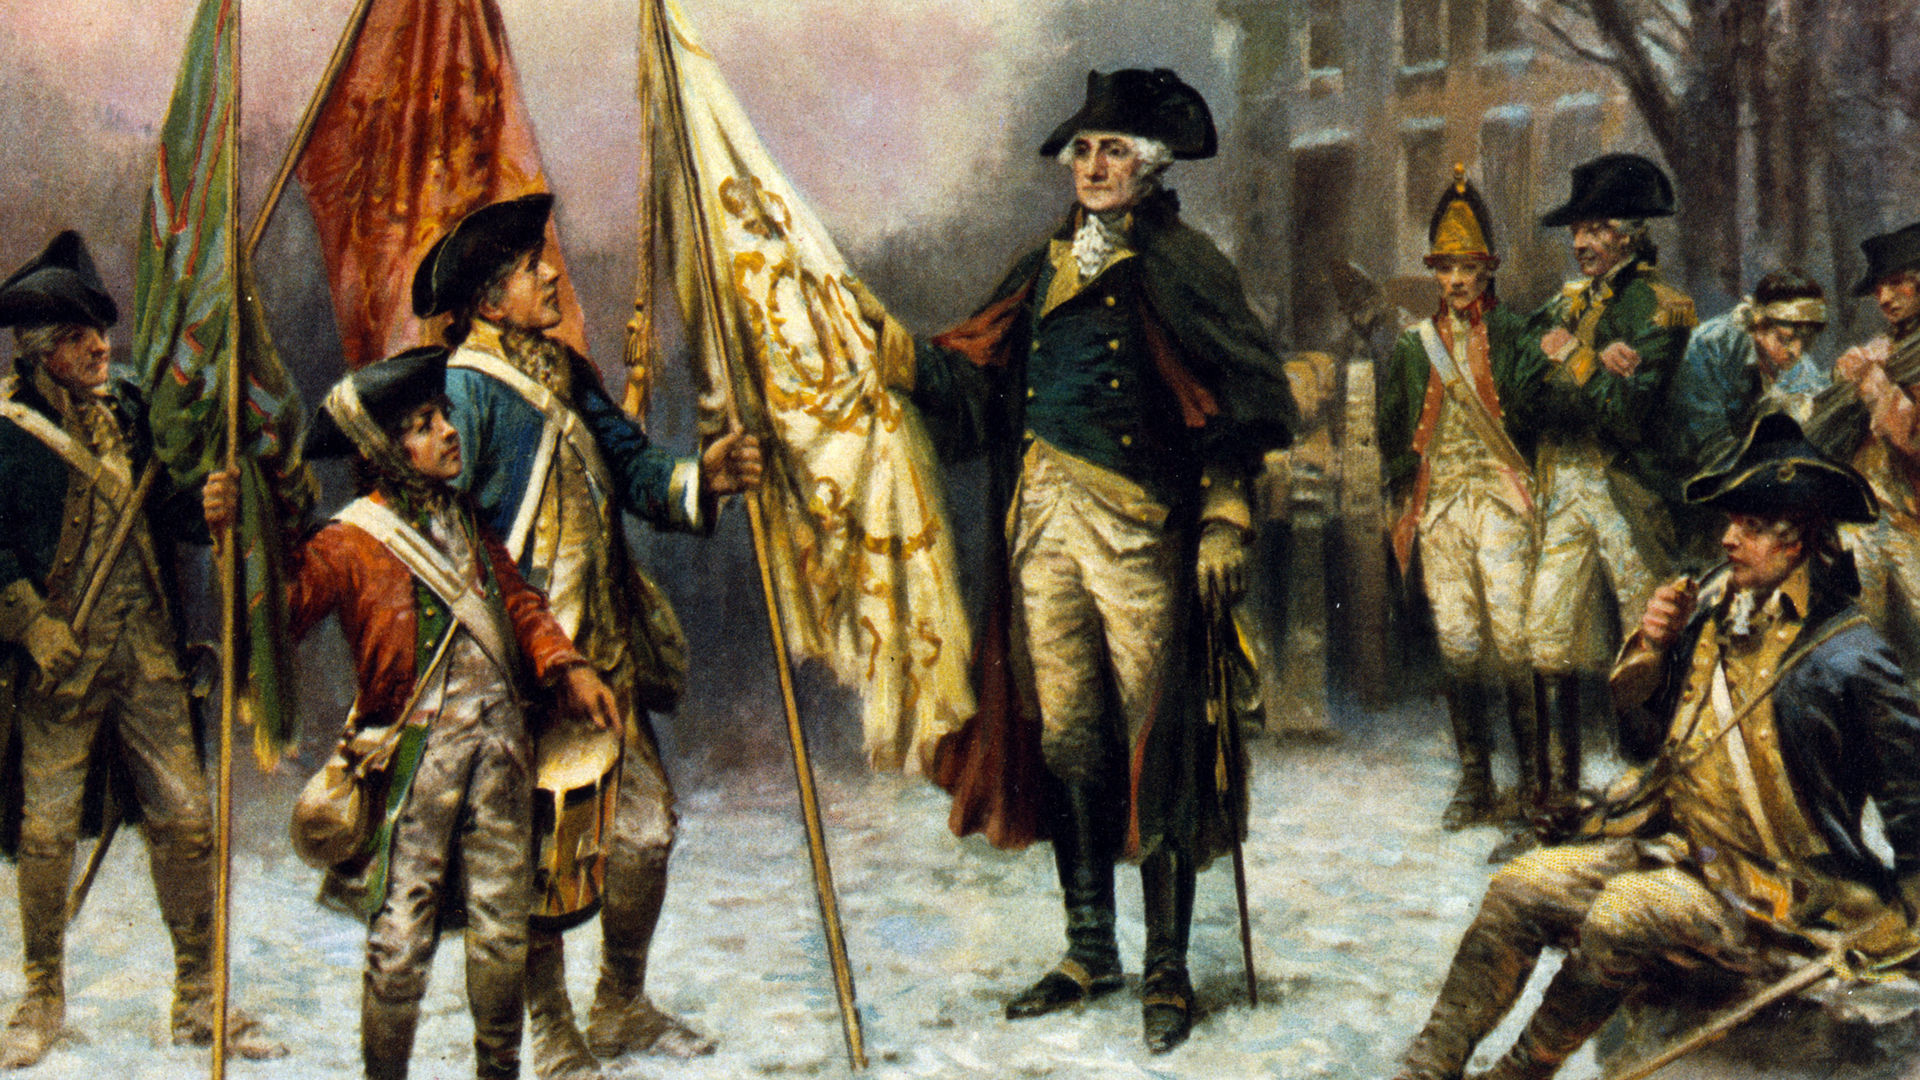 Read More: George Washington Used Spies to Win the Revolution